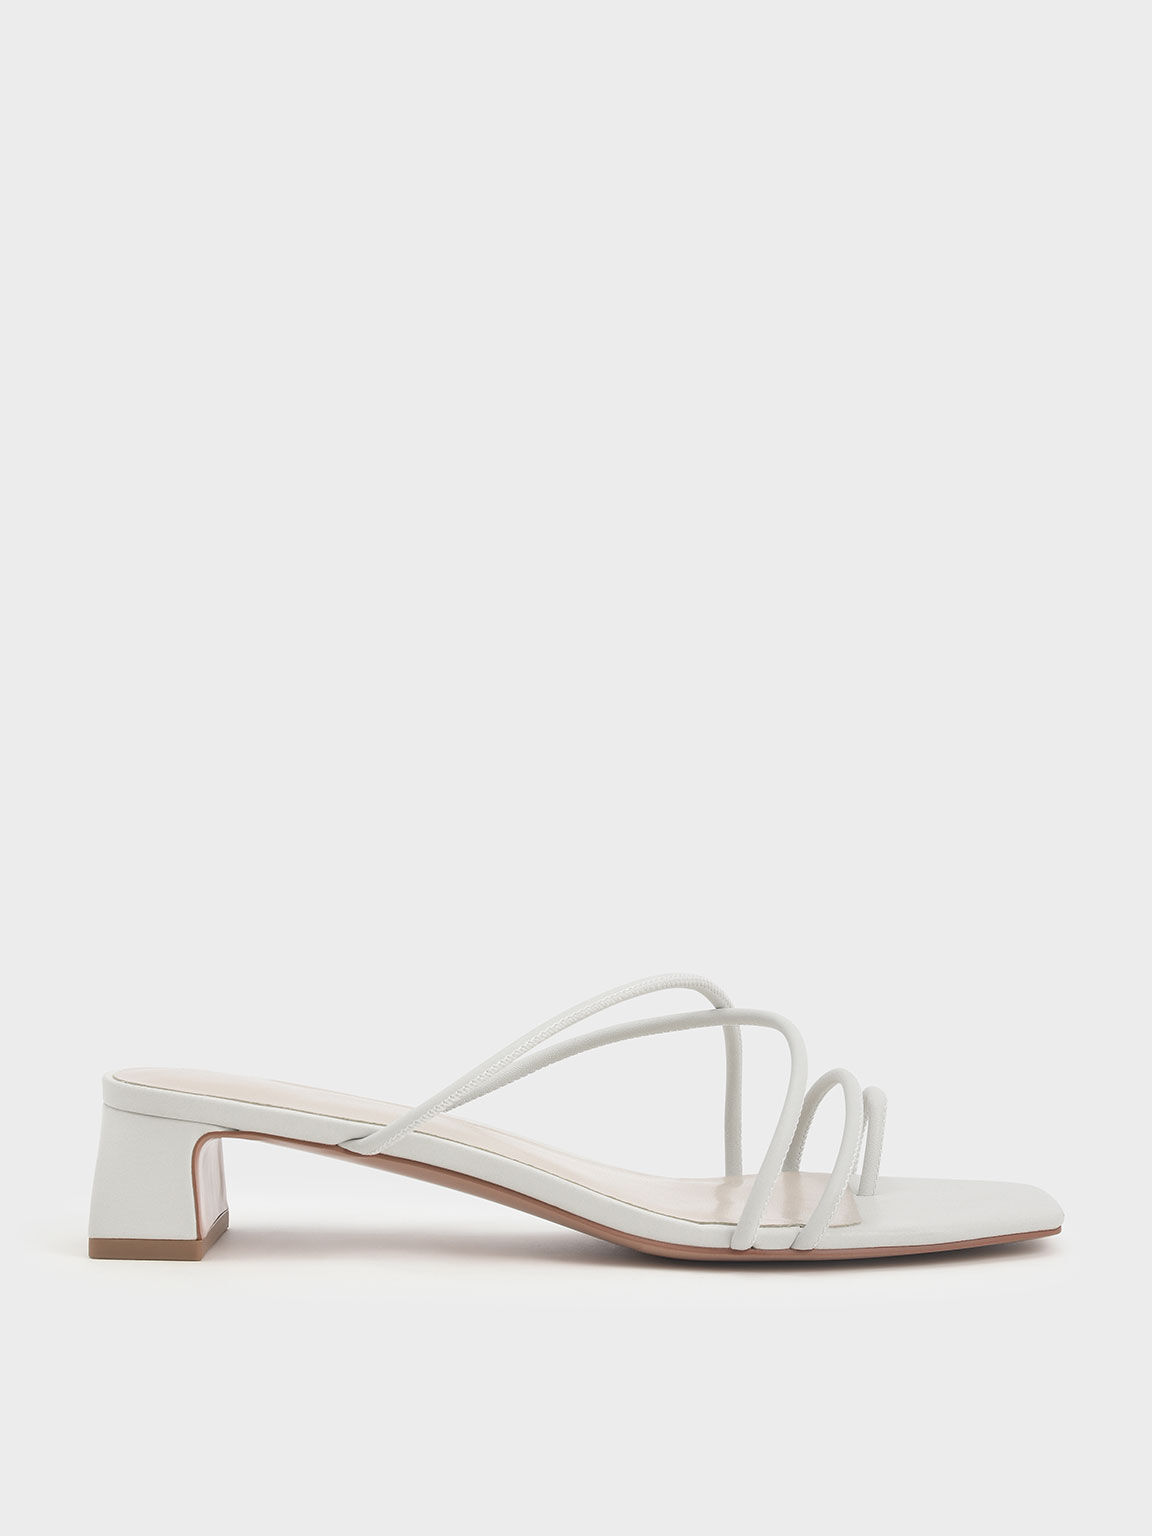 Meadow Strappy Toe Ring Sandals, White, hi-res